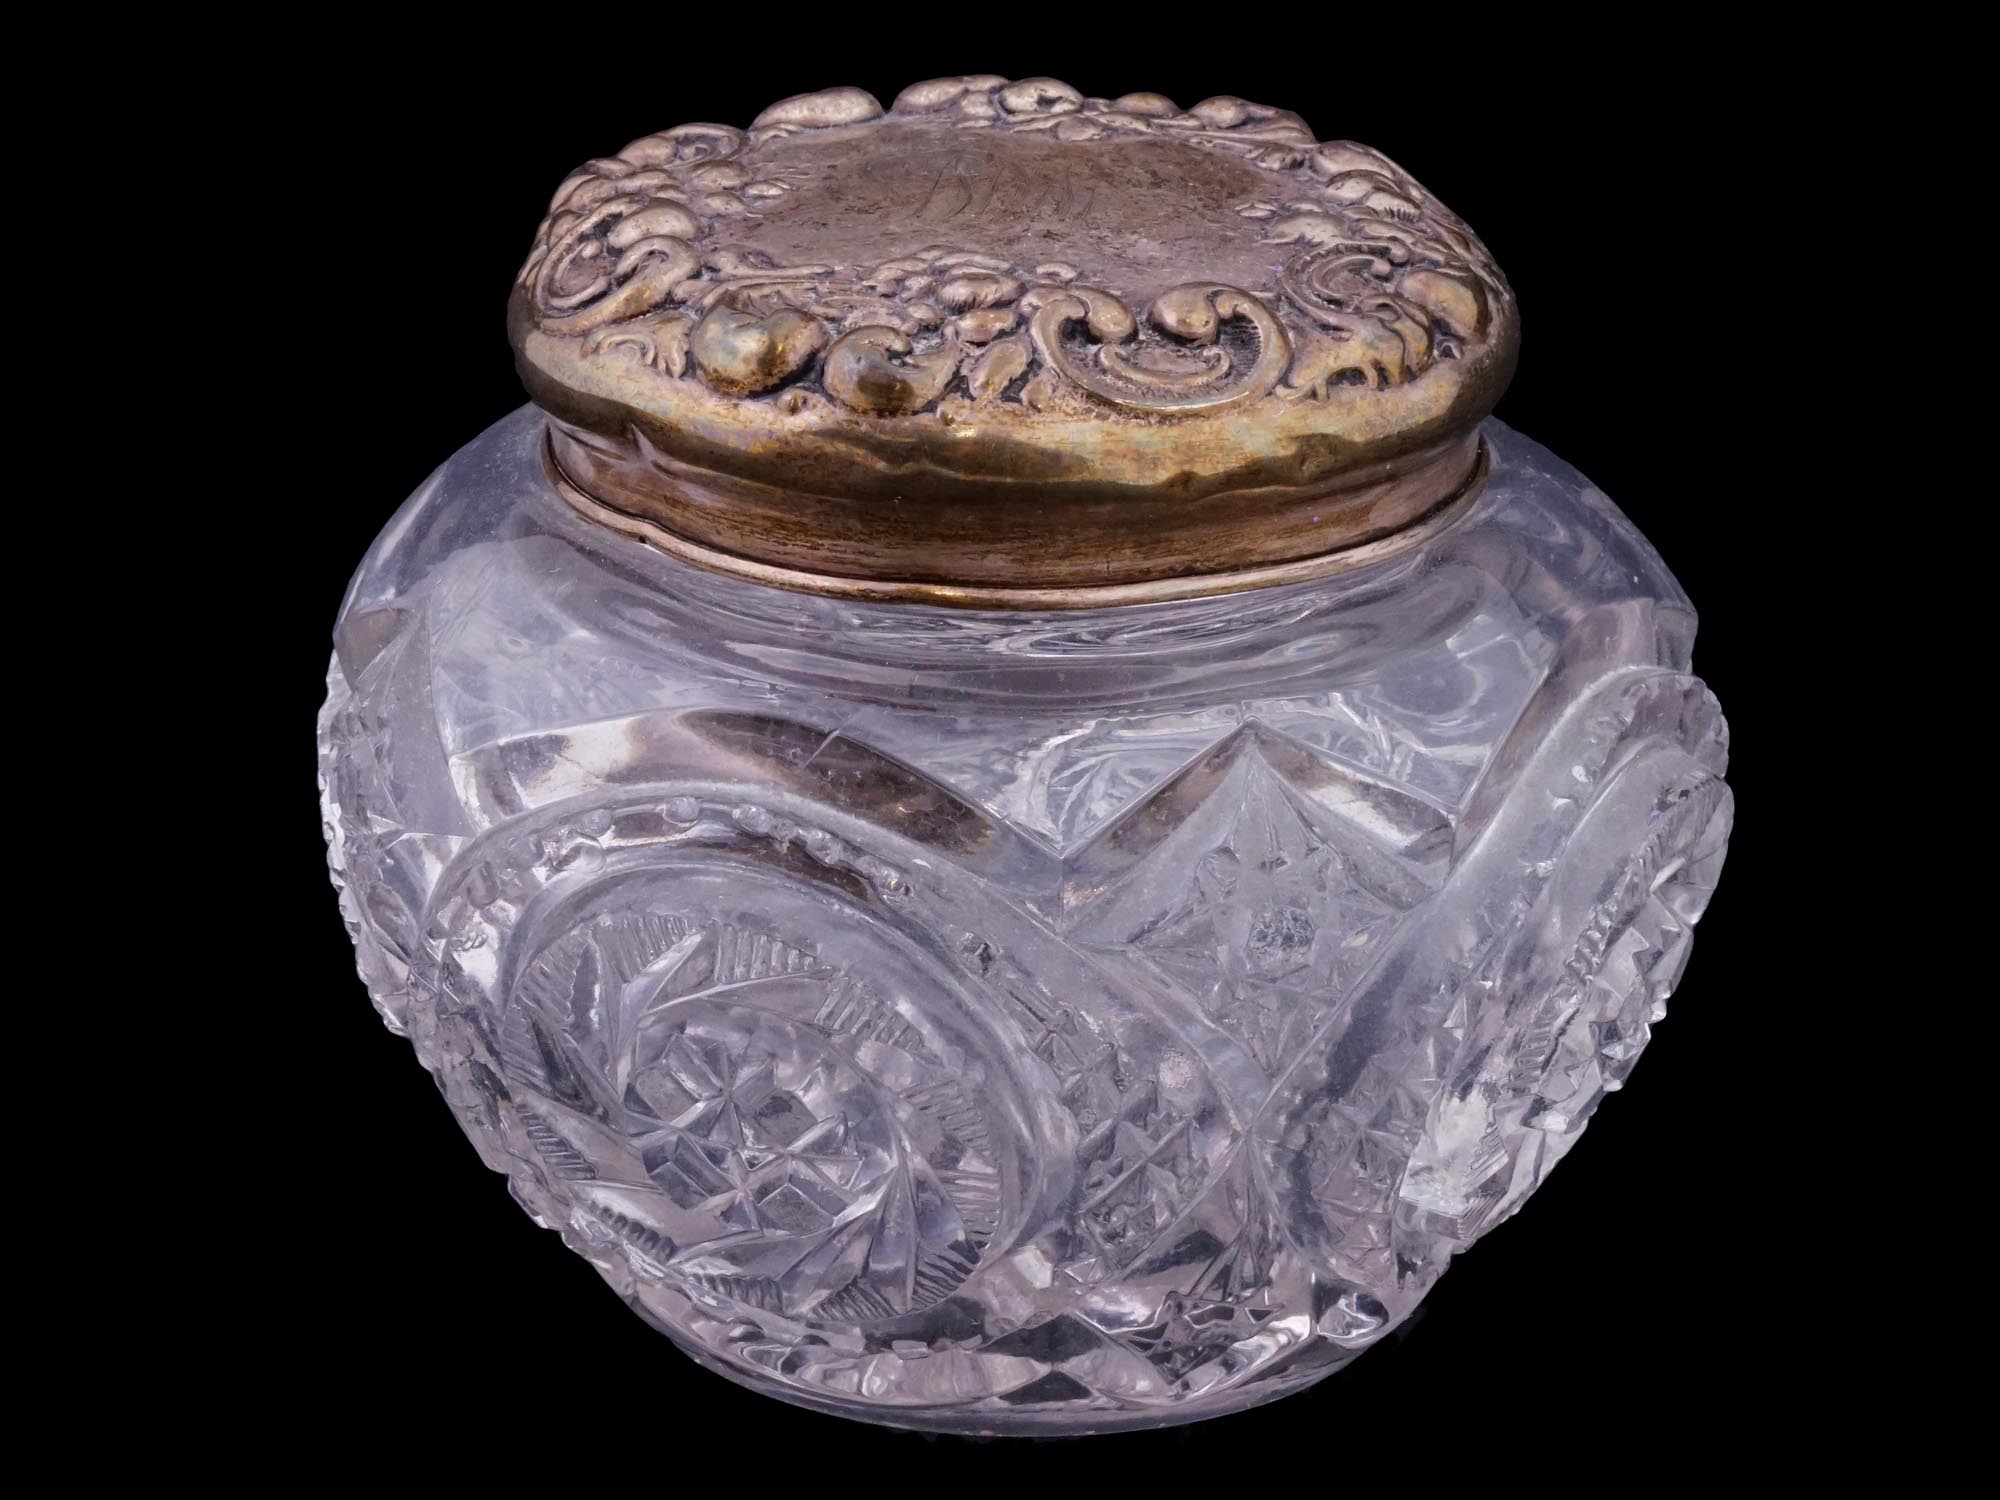 ANTIQUE STERLING SILVER AND CUT GLASS DRESSER JAR PIC-0